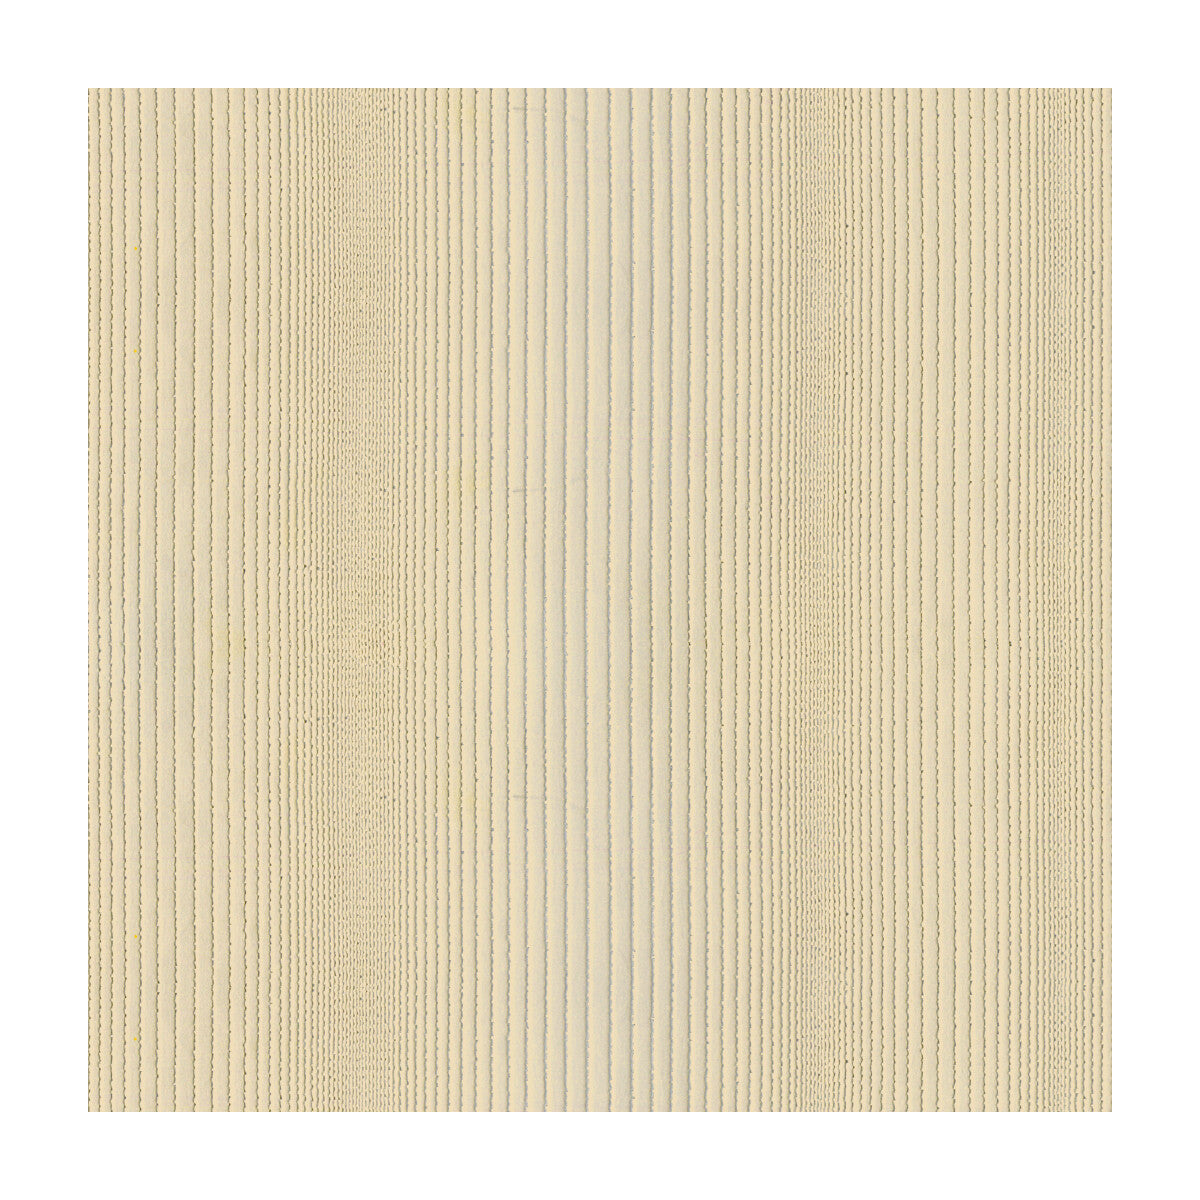 Kravet Contract fabric in 4168-16 color - pattern 4168.16.0 - by Kravet Contract